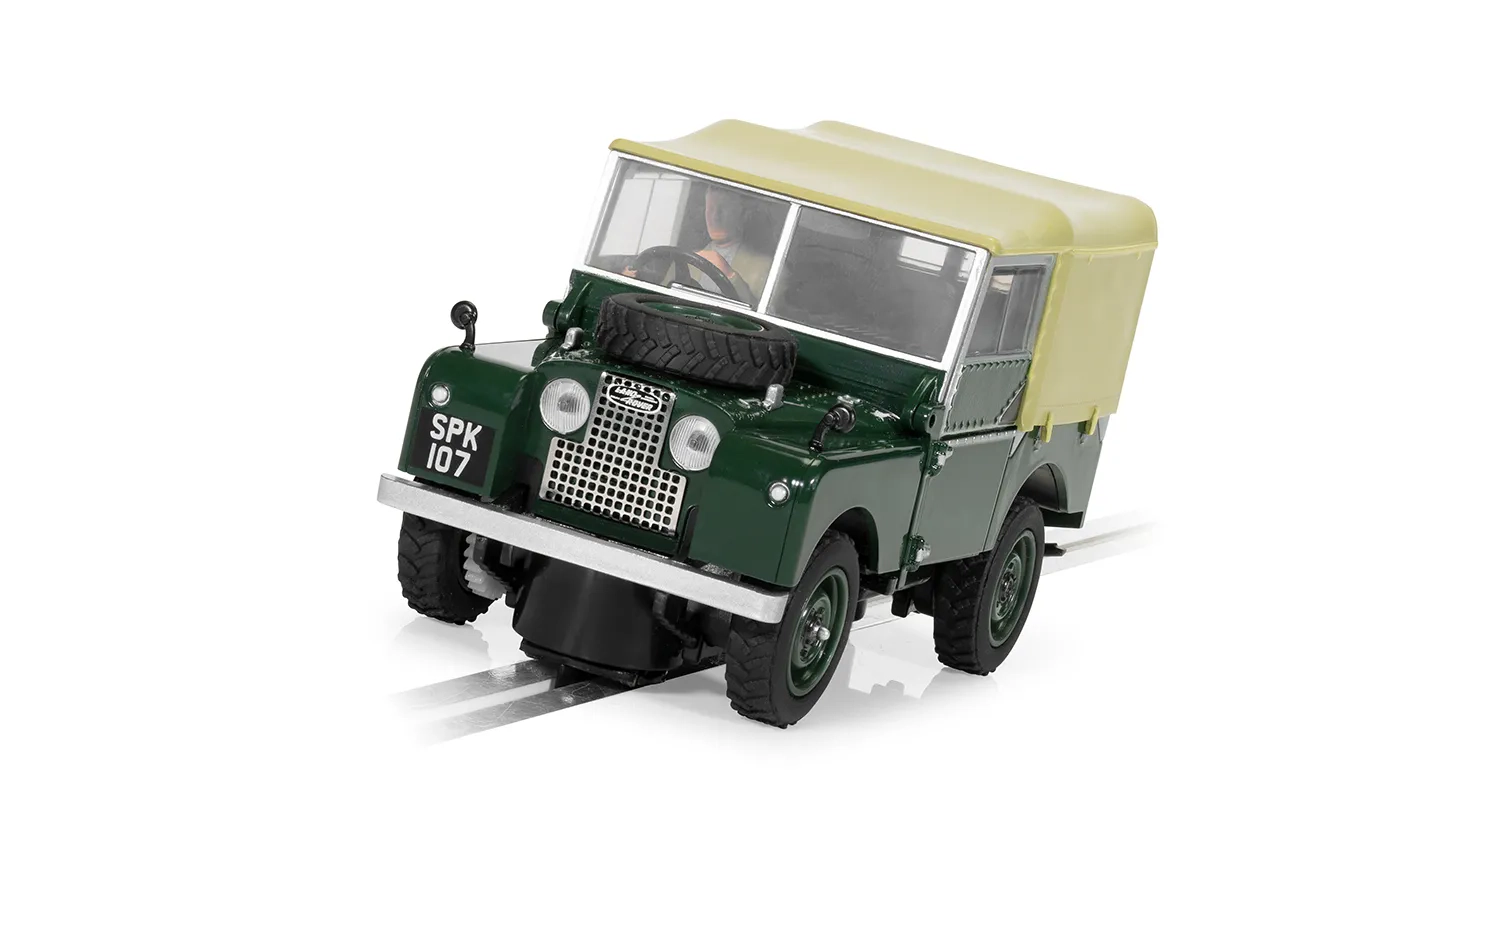 Land Rover Series 1 - Green